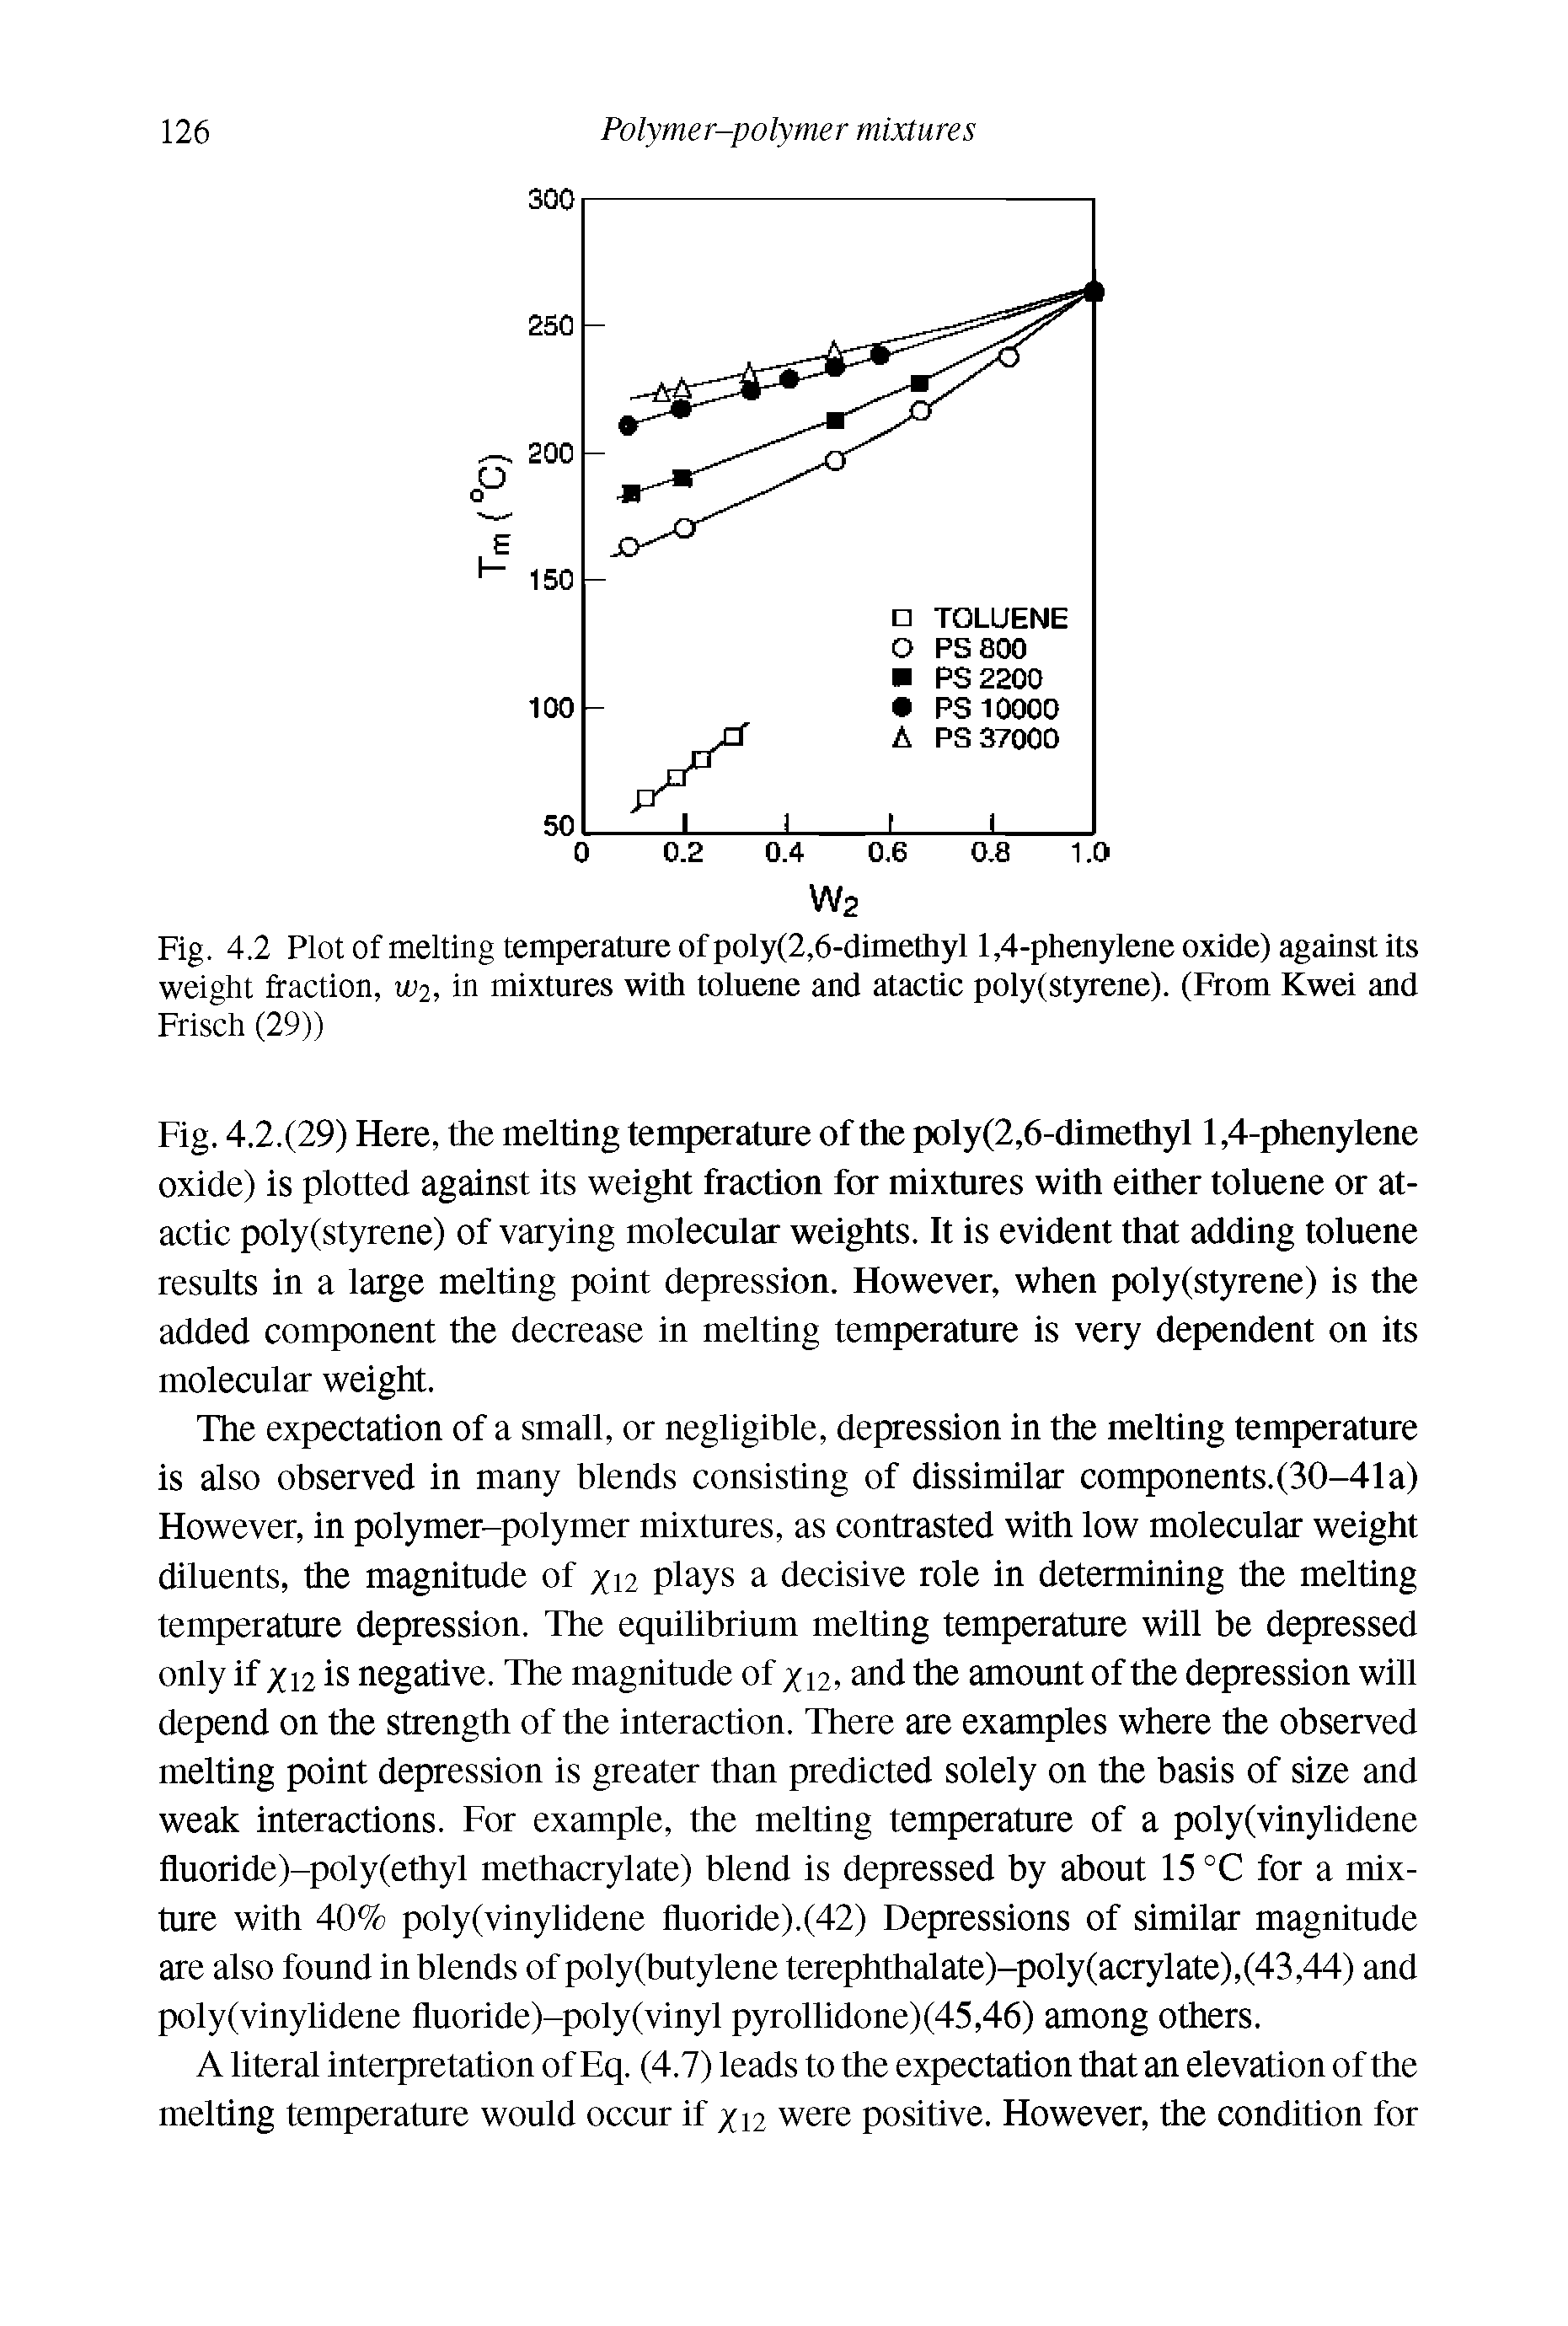 Fig. 4.2 Plot of melting temperature of poly(2,6-dimethyl 1,4-phenylene oxide) against its weight fraction, W2, in mixtures with toluene and atactic poly(styrene). (From Kwei and Frisch (29))...